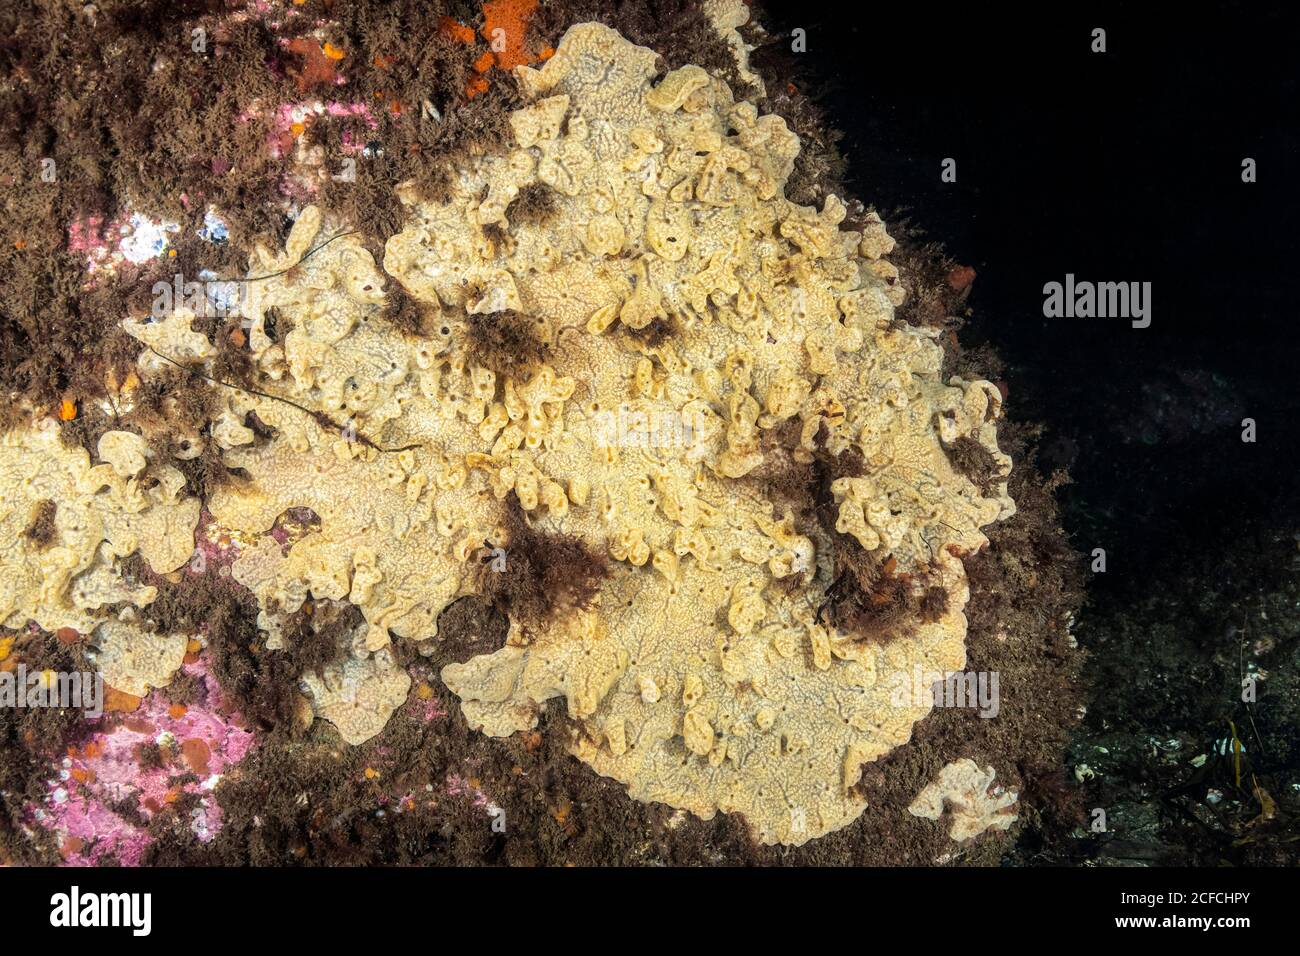 Compound sea squirt, Didemnum vexillum, a chordate marine animal, in the Gulf of Maine, USA, Atlantic Ocean. This invasive colonial tunicate is a quic Stock Photo